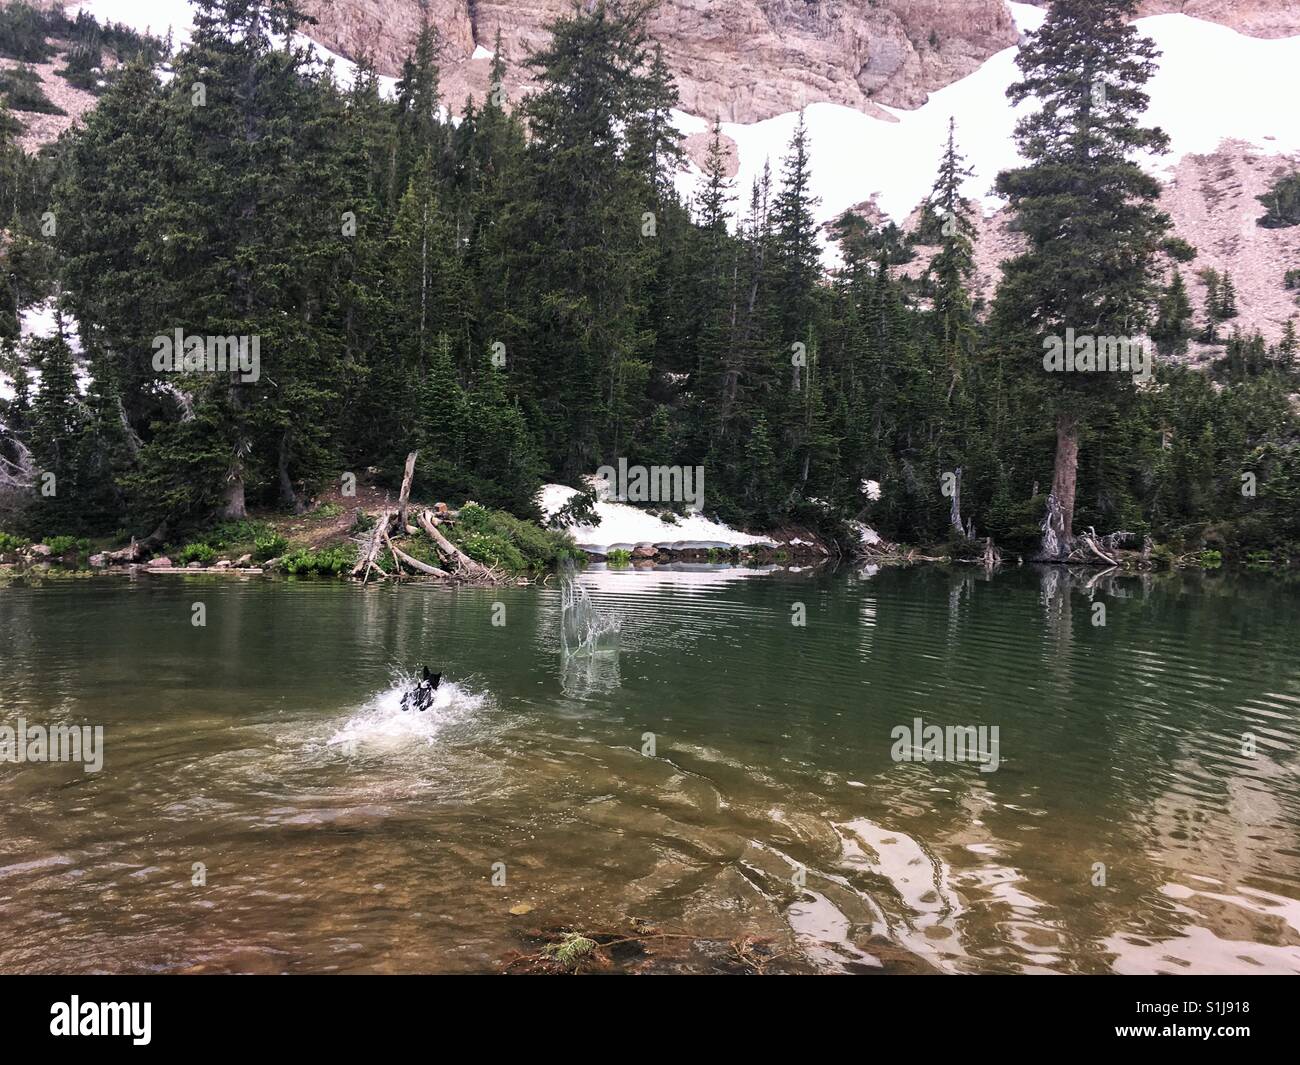 A dog jumps in to swim through and alpine lake. Stock Photo